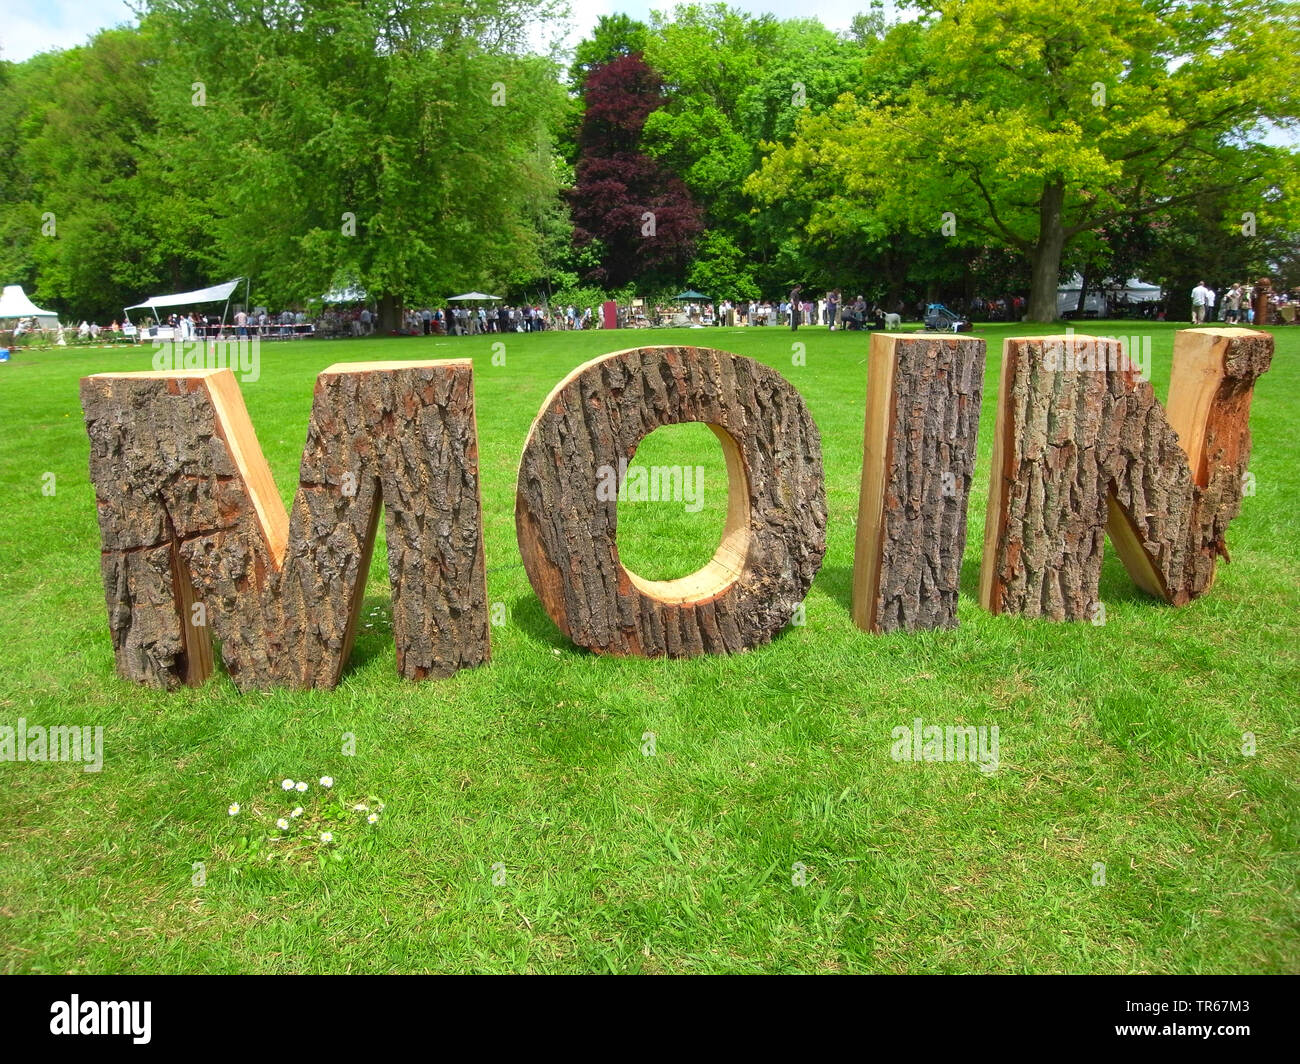 oak (Quercus spec.), the word Moin (Good morning) made from tree trunks, Germany Stock Photo